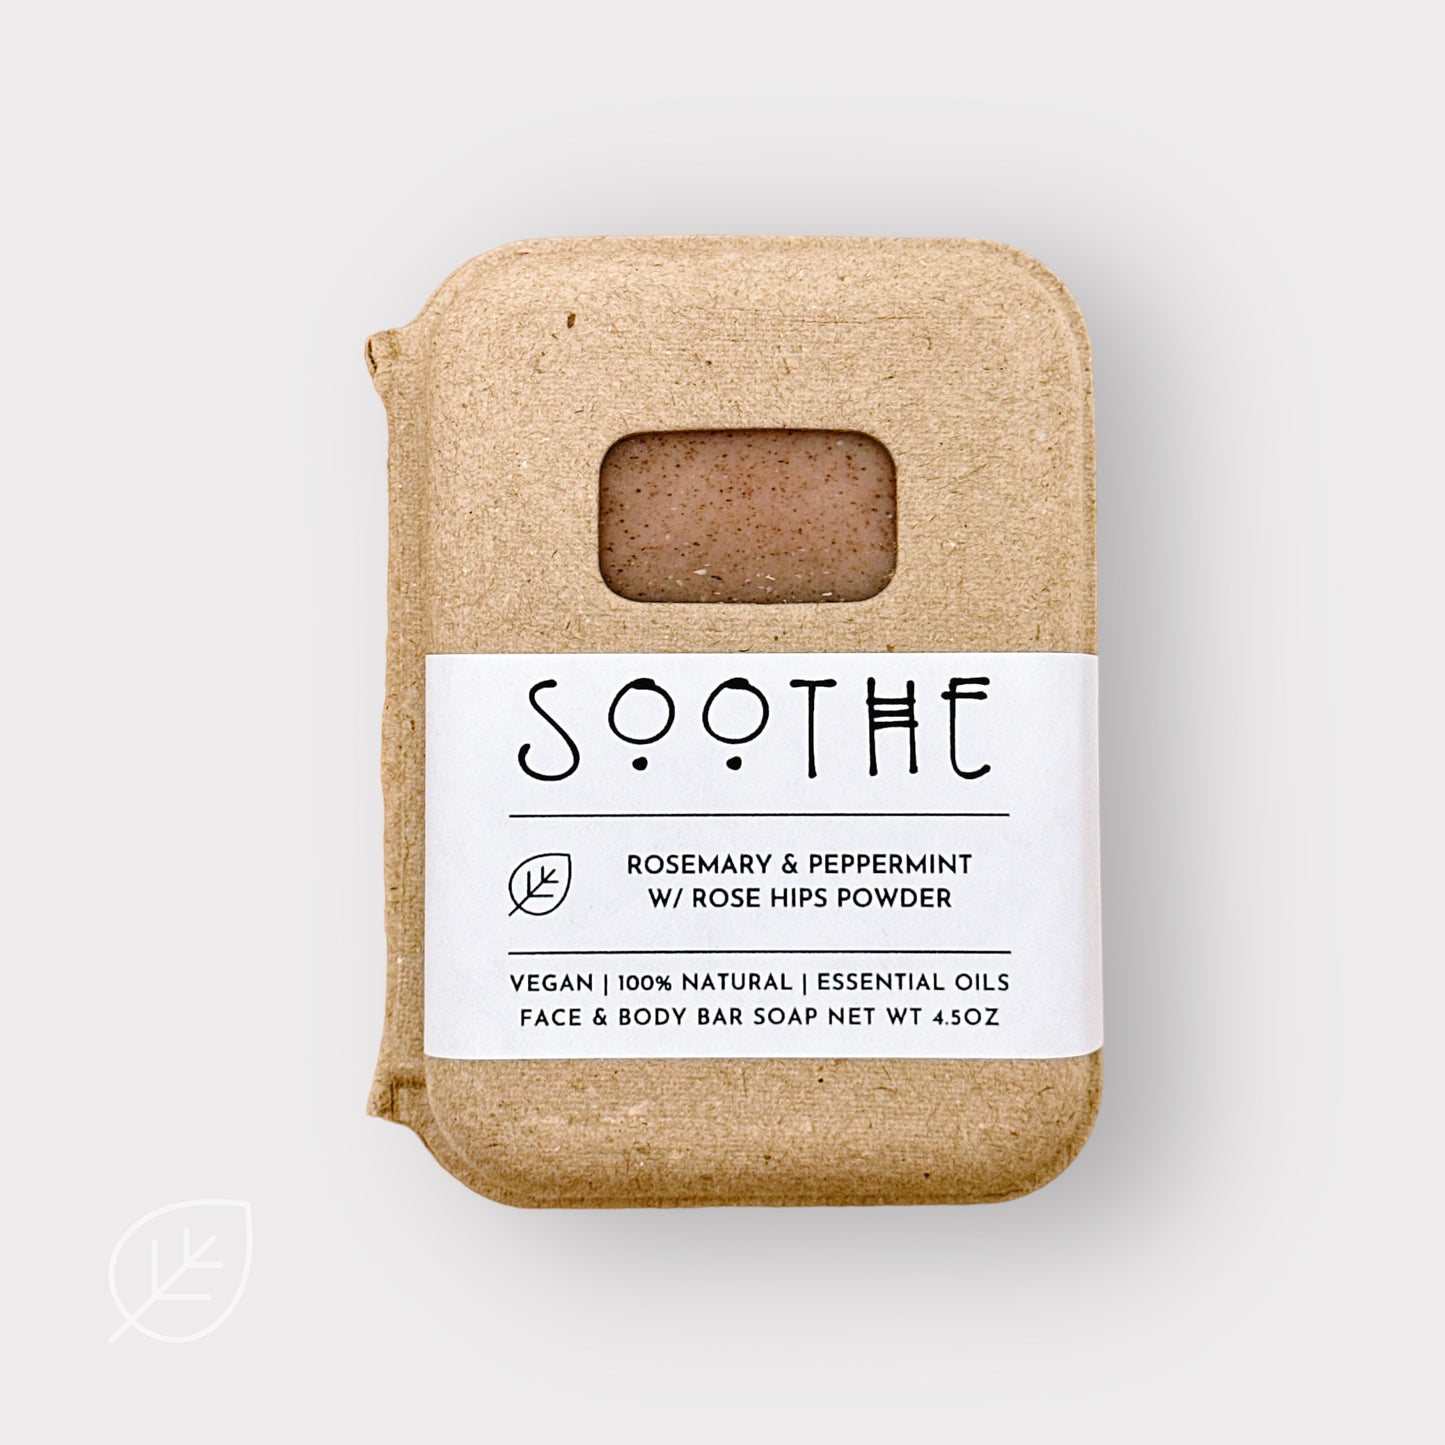 Soothe Bar Soap - Rosemary & Peppermint w/ Rose Hips Powder